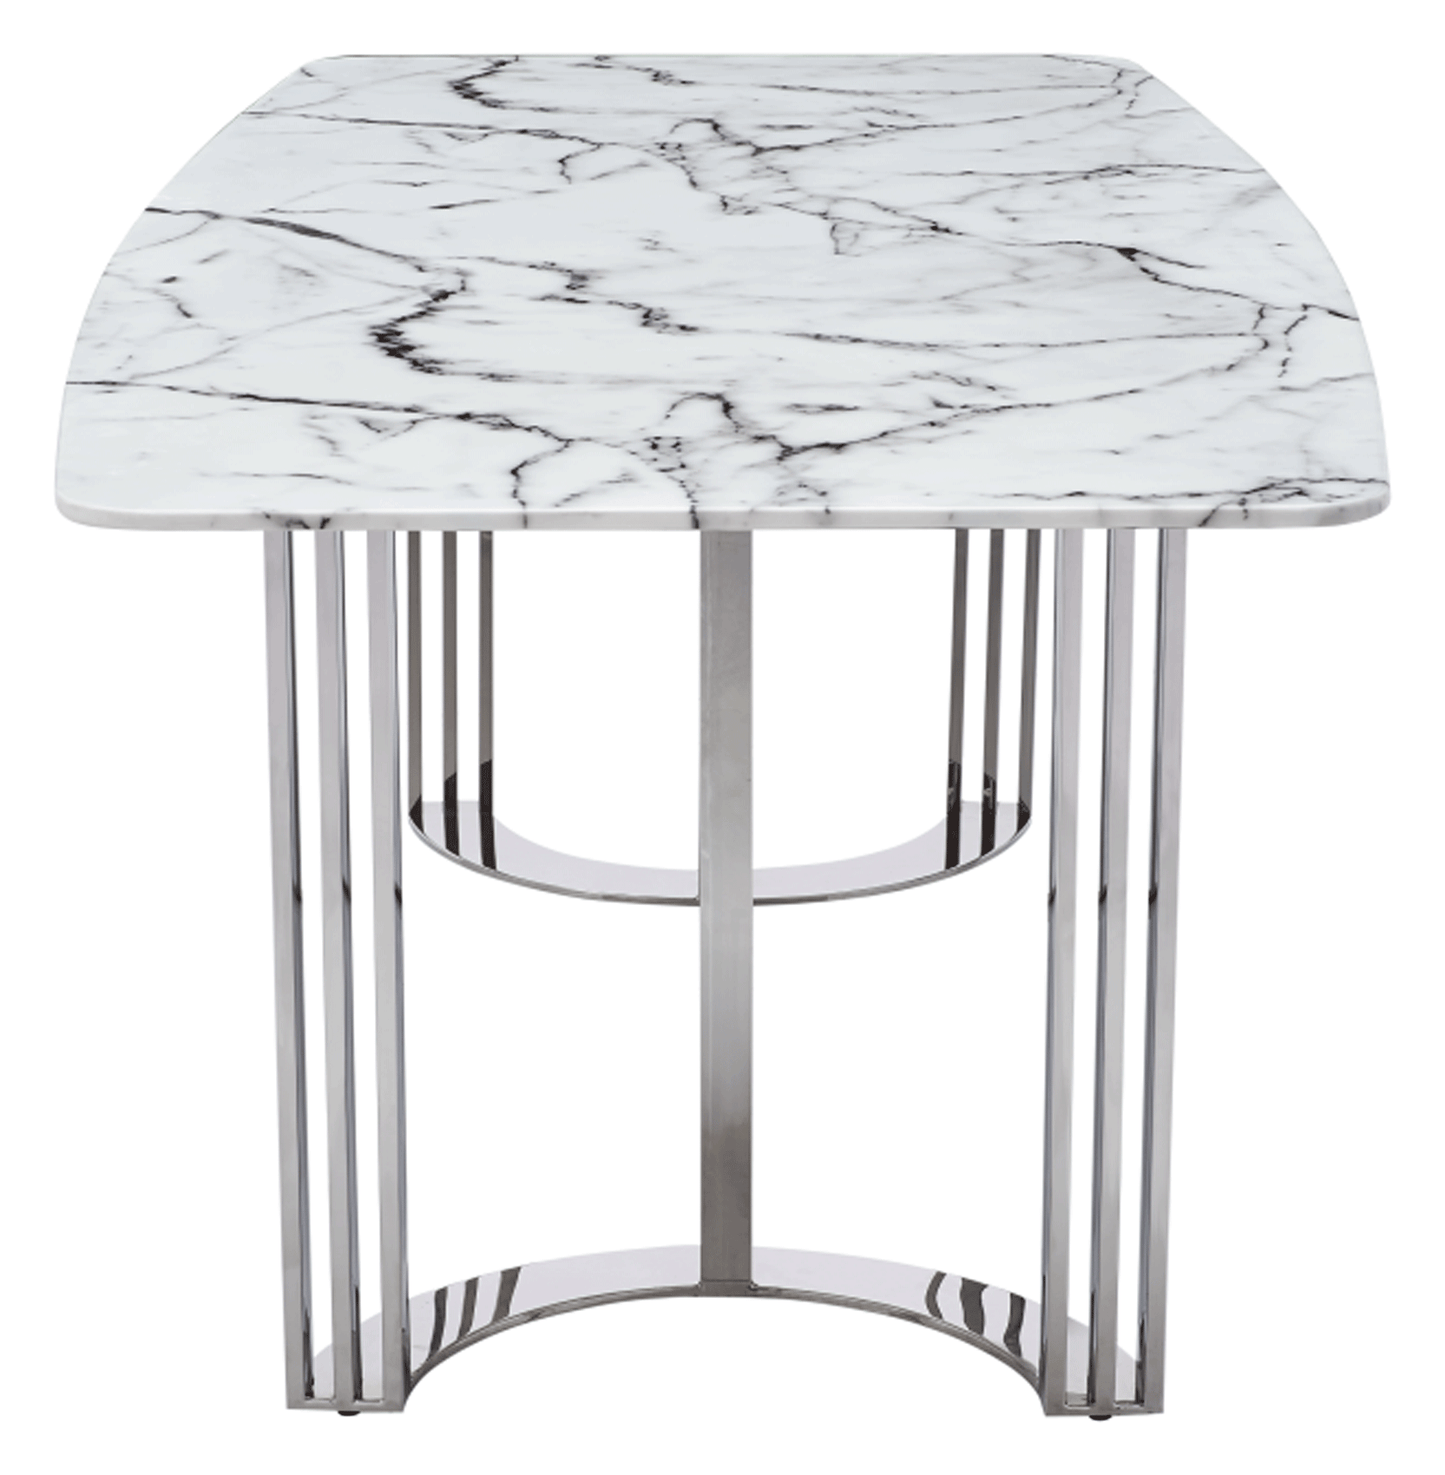 131 Silver Marble Dining Table